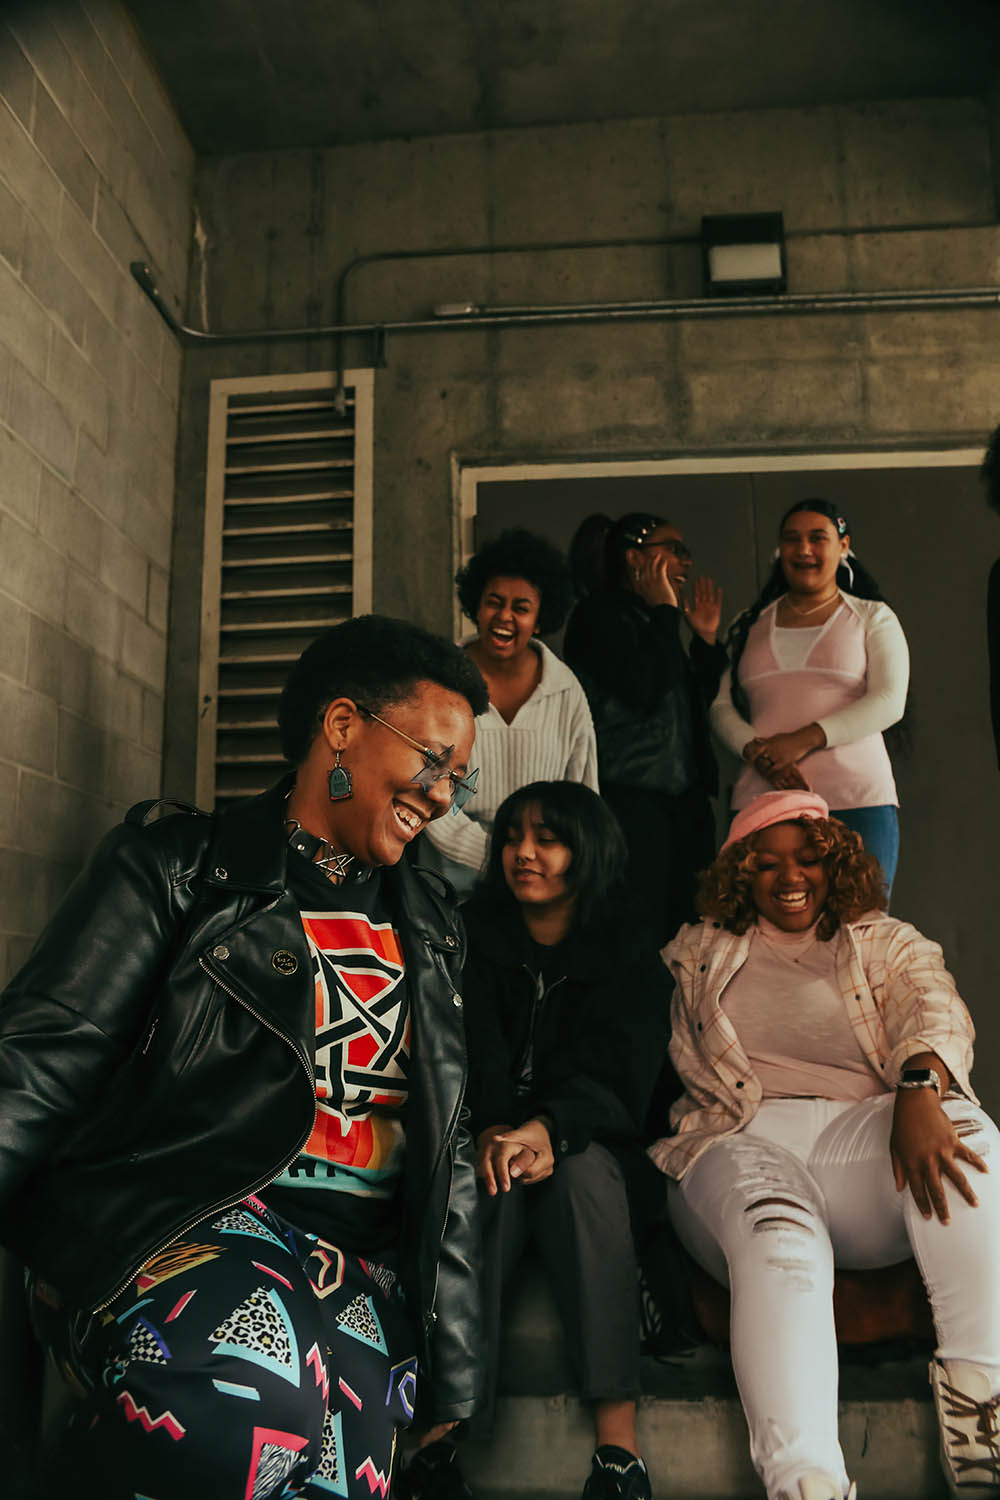 A group of Black students smiling and laughing on a stairway